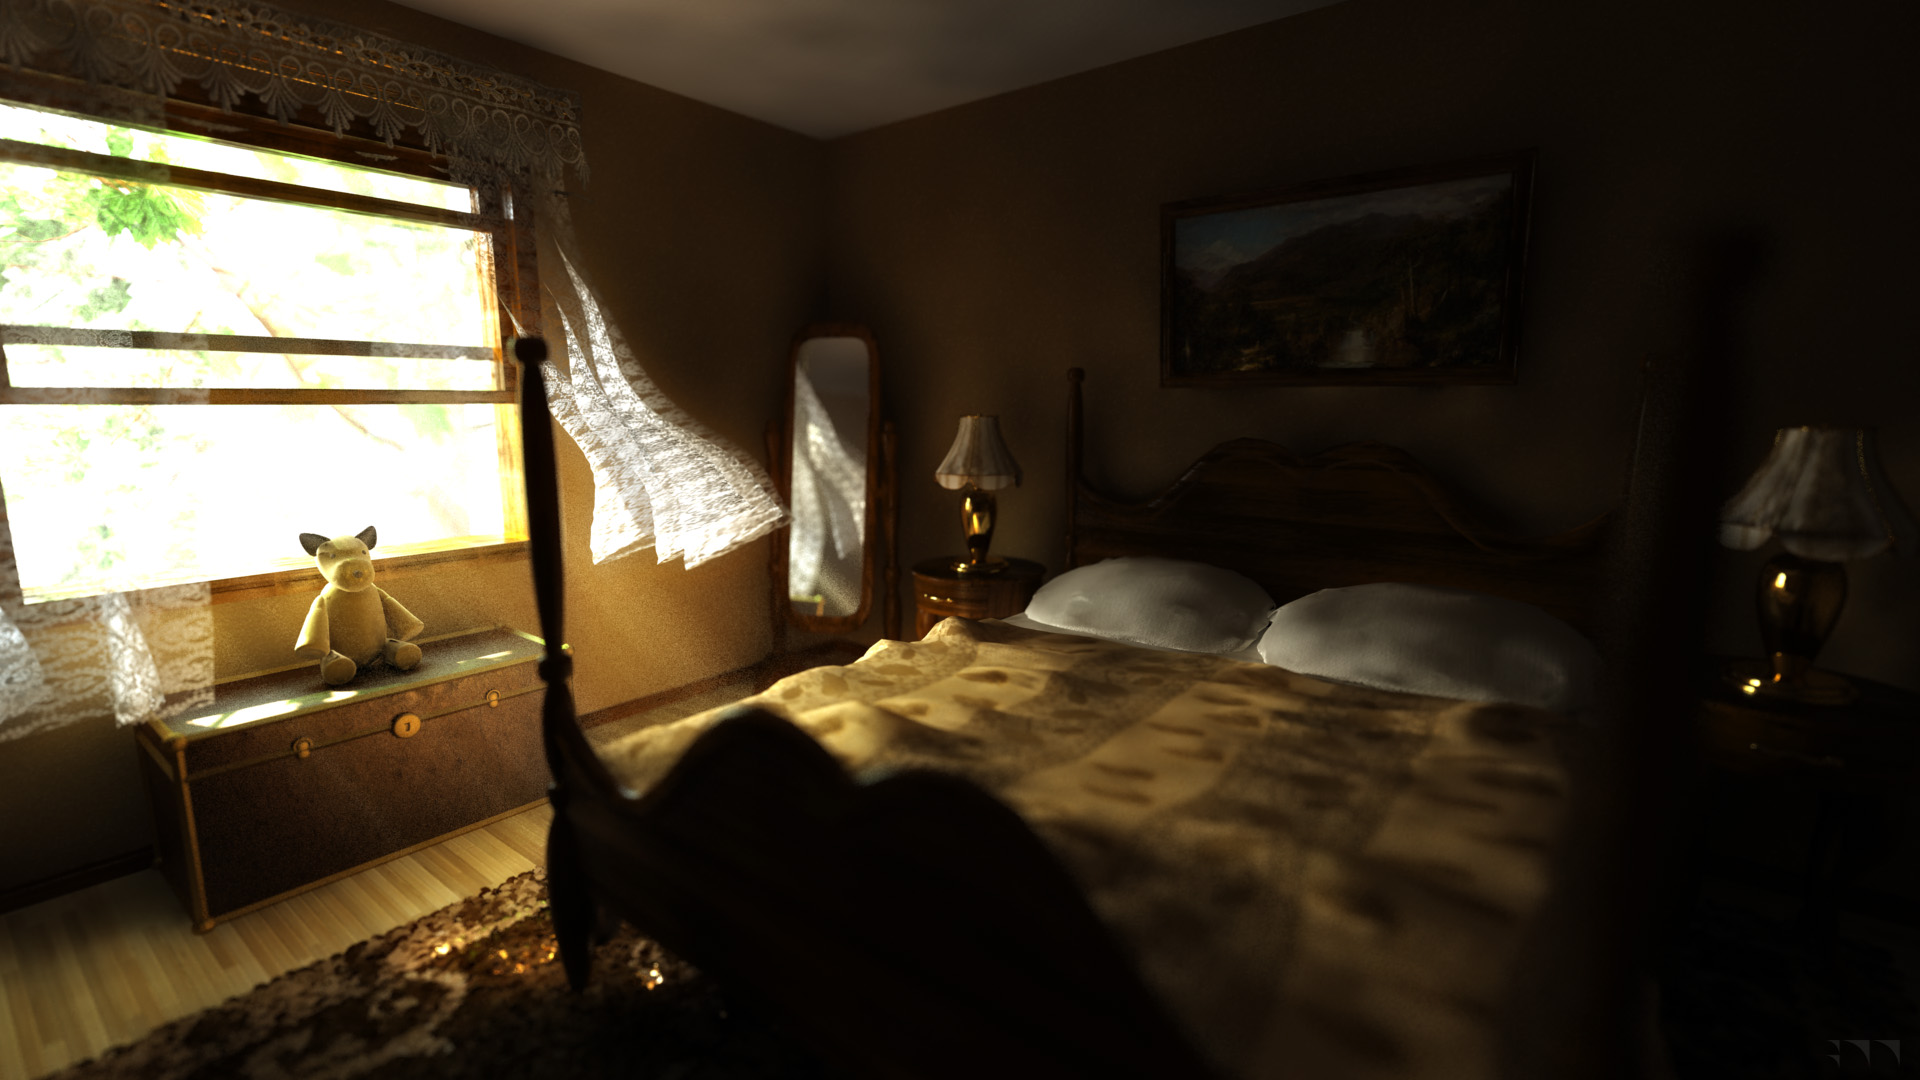 Your Grandma's Guest Room - 2014